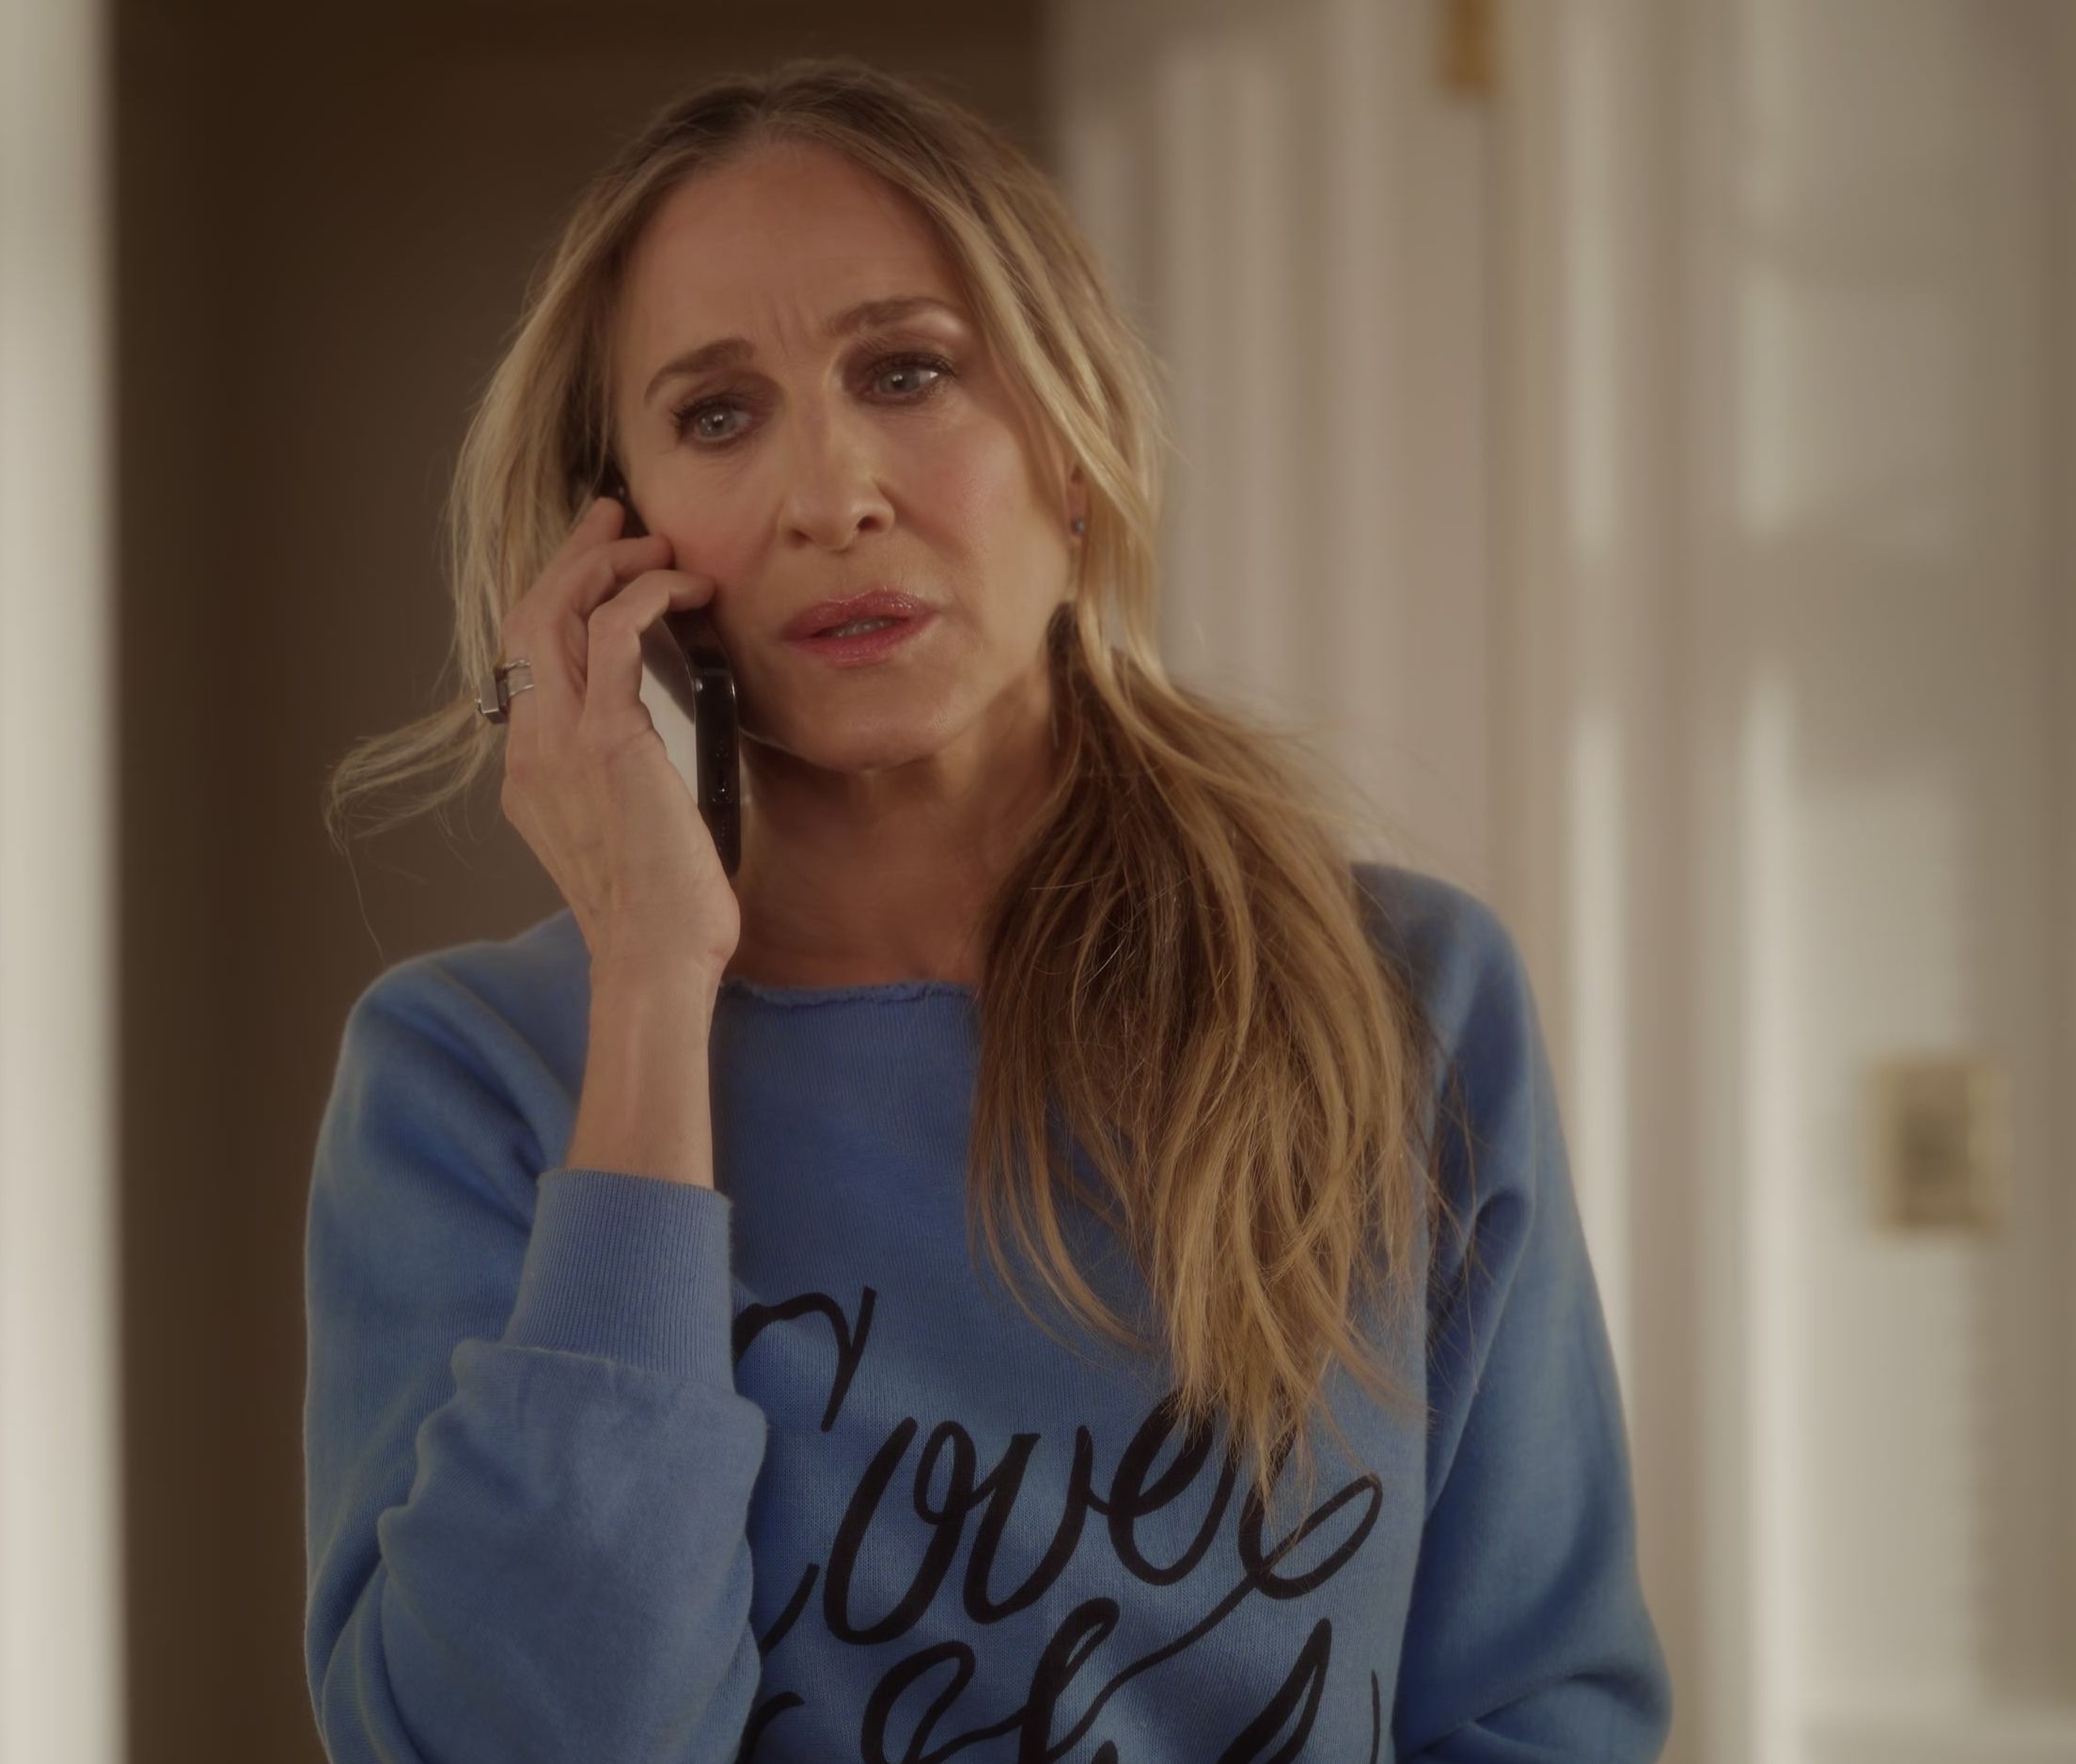 Worn on And Just Like That... TV Show - Blue Sweatshirt of Sarah Jessica Parker as Carrie Bradshaw